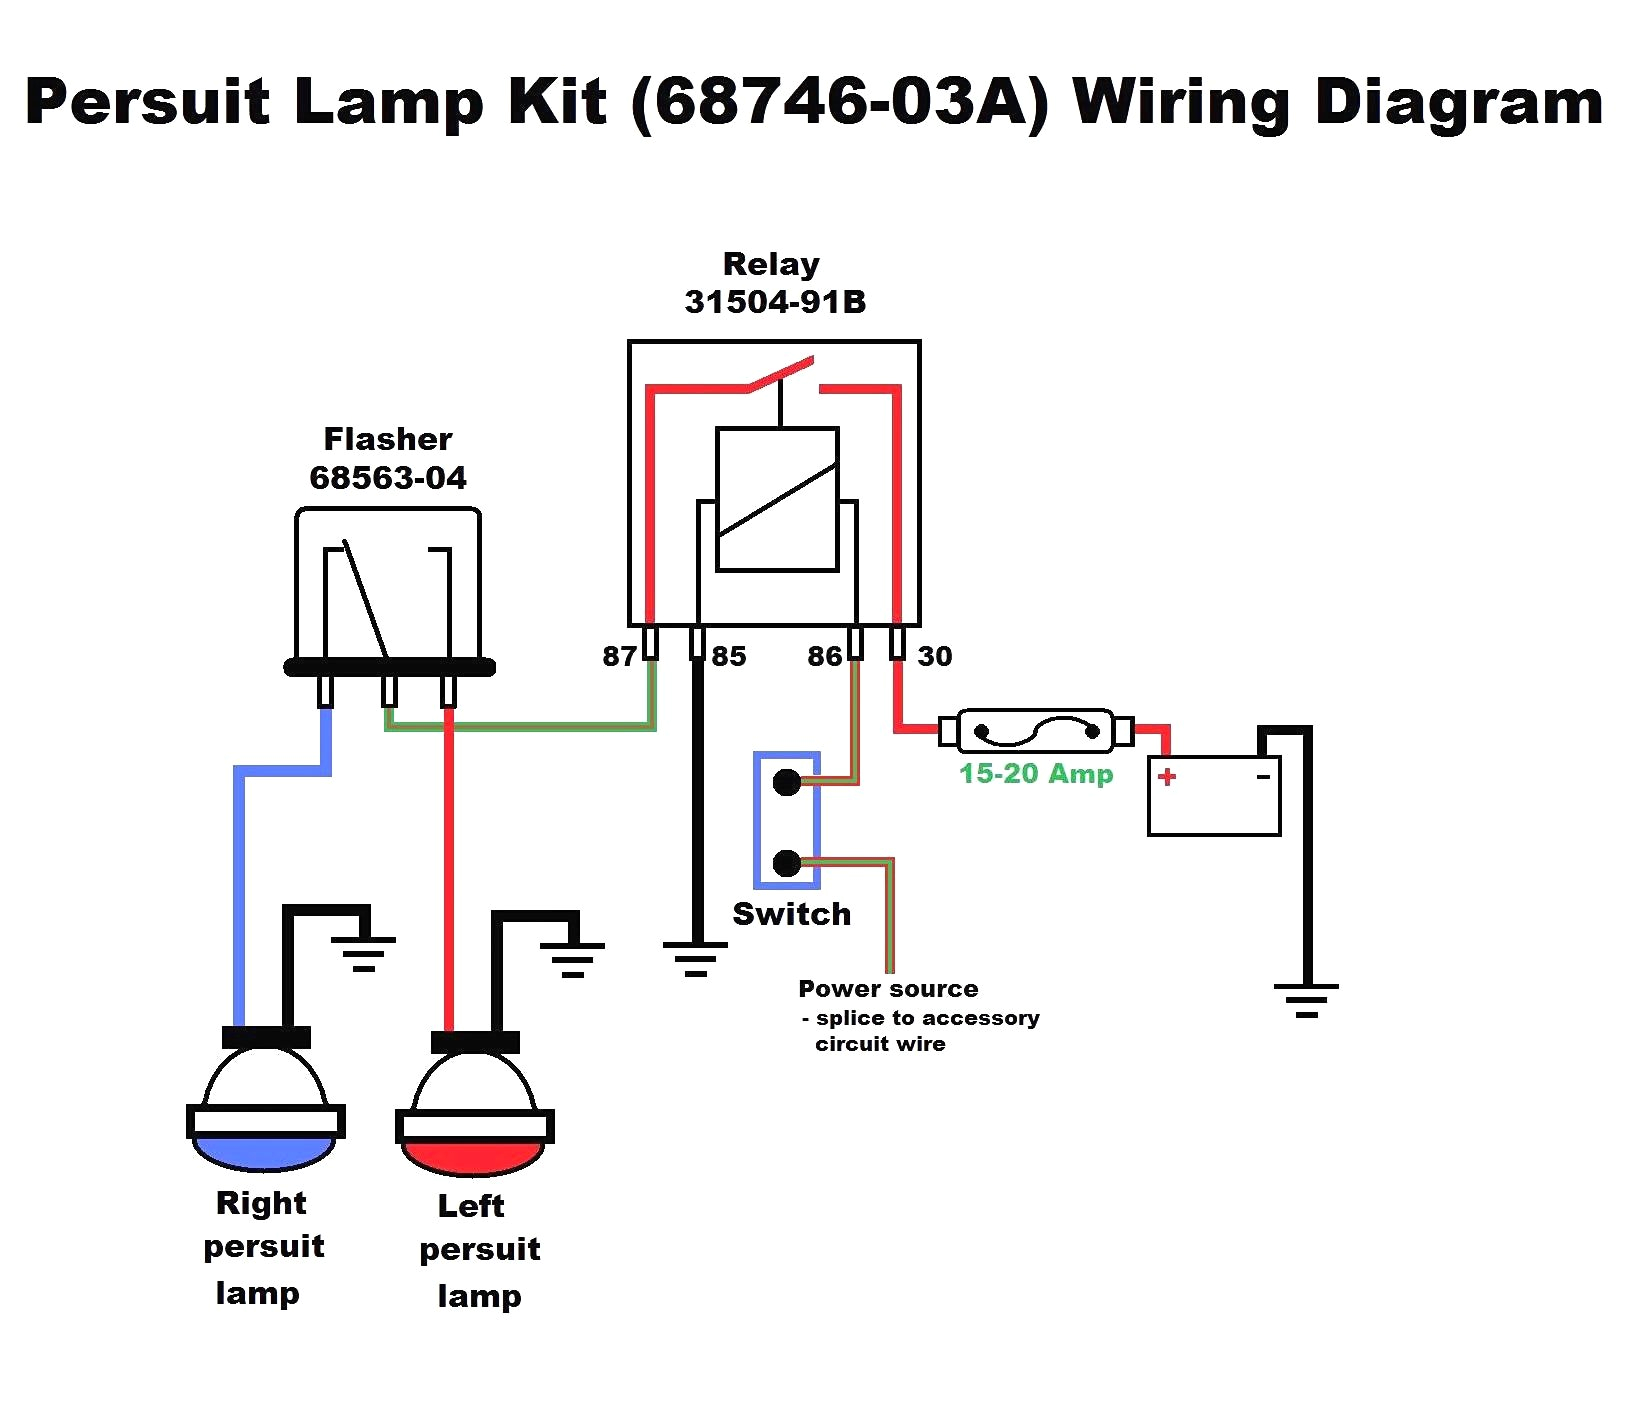 wig wag flasher relay wiring diagrams wiring diagram meta 12 volt flasher wiring diagram wiring diagram